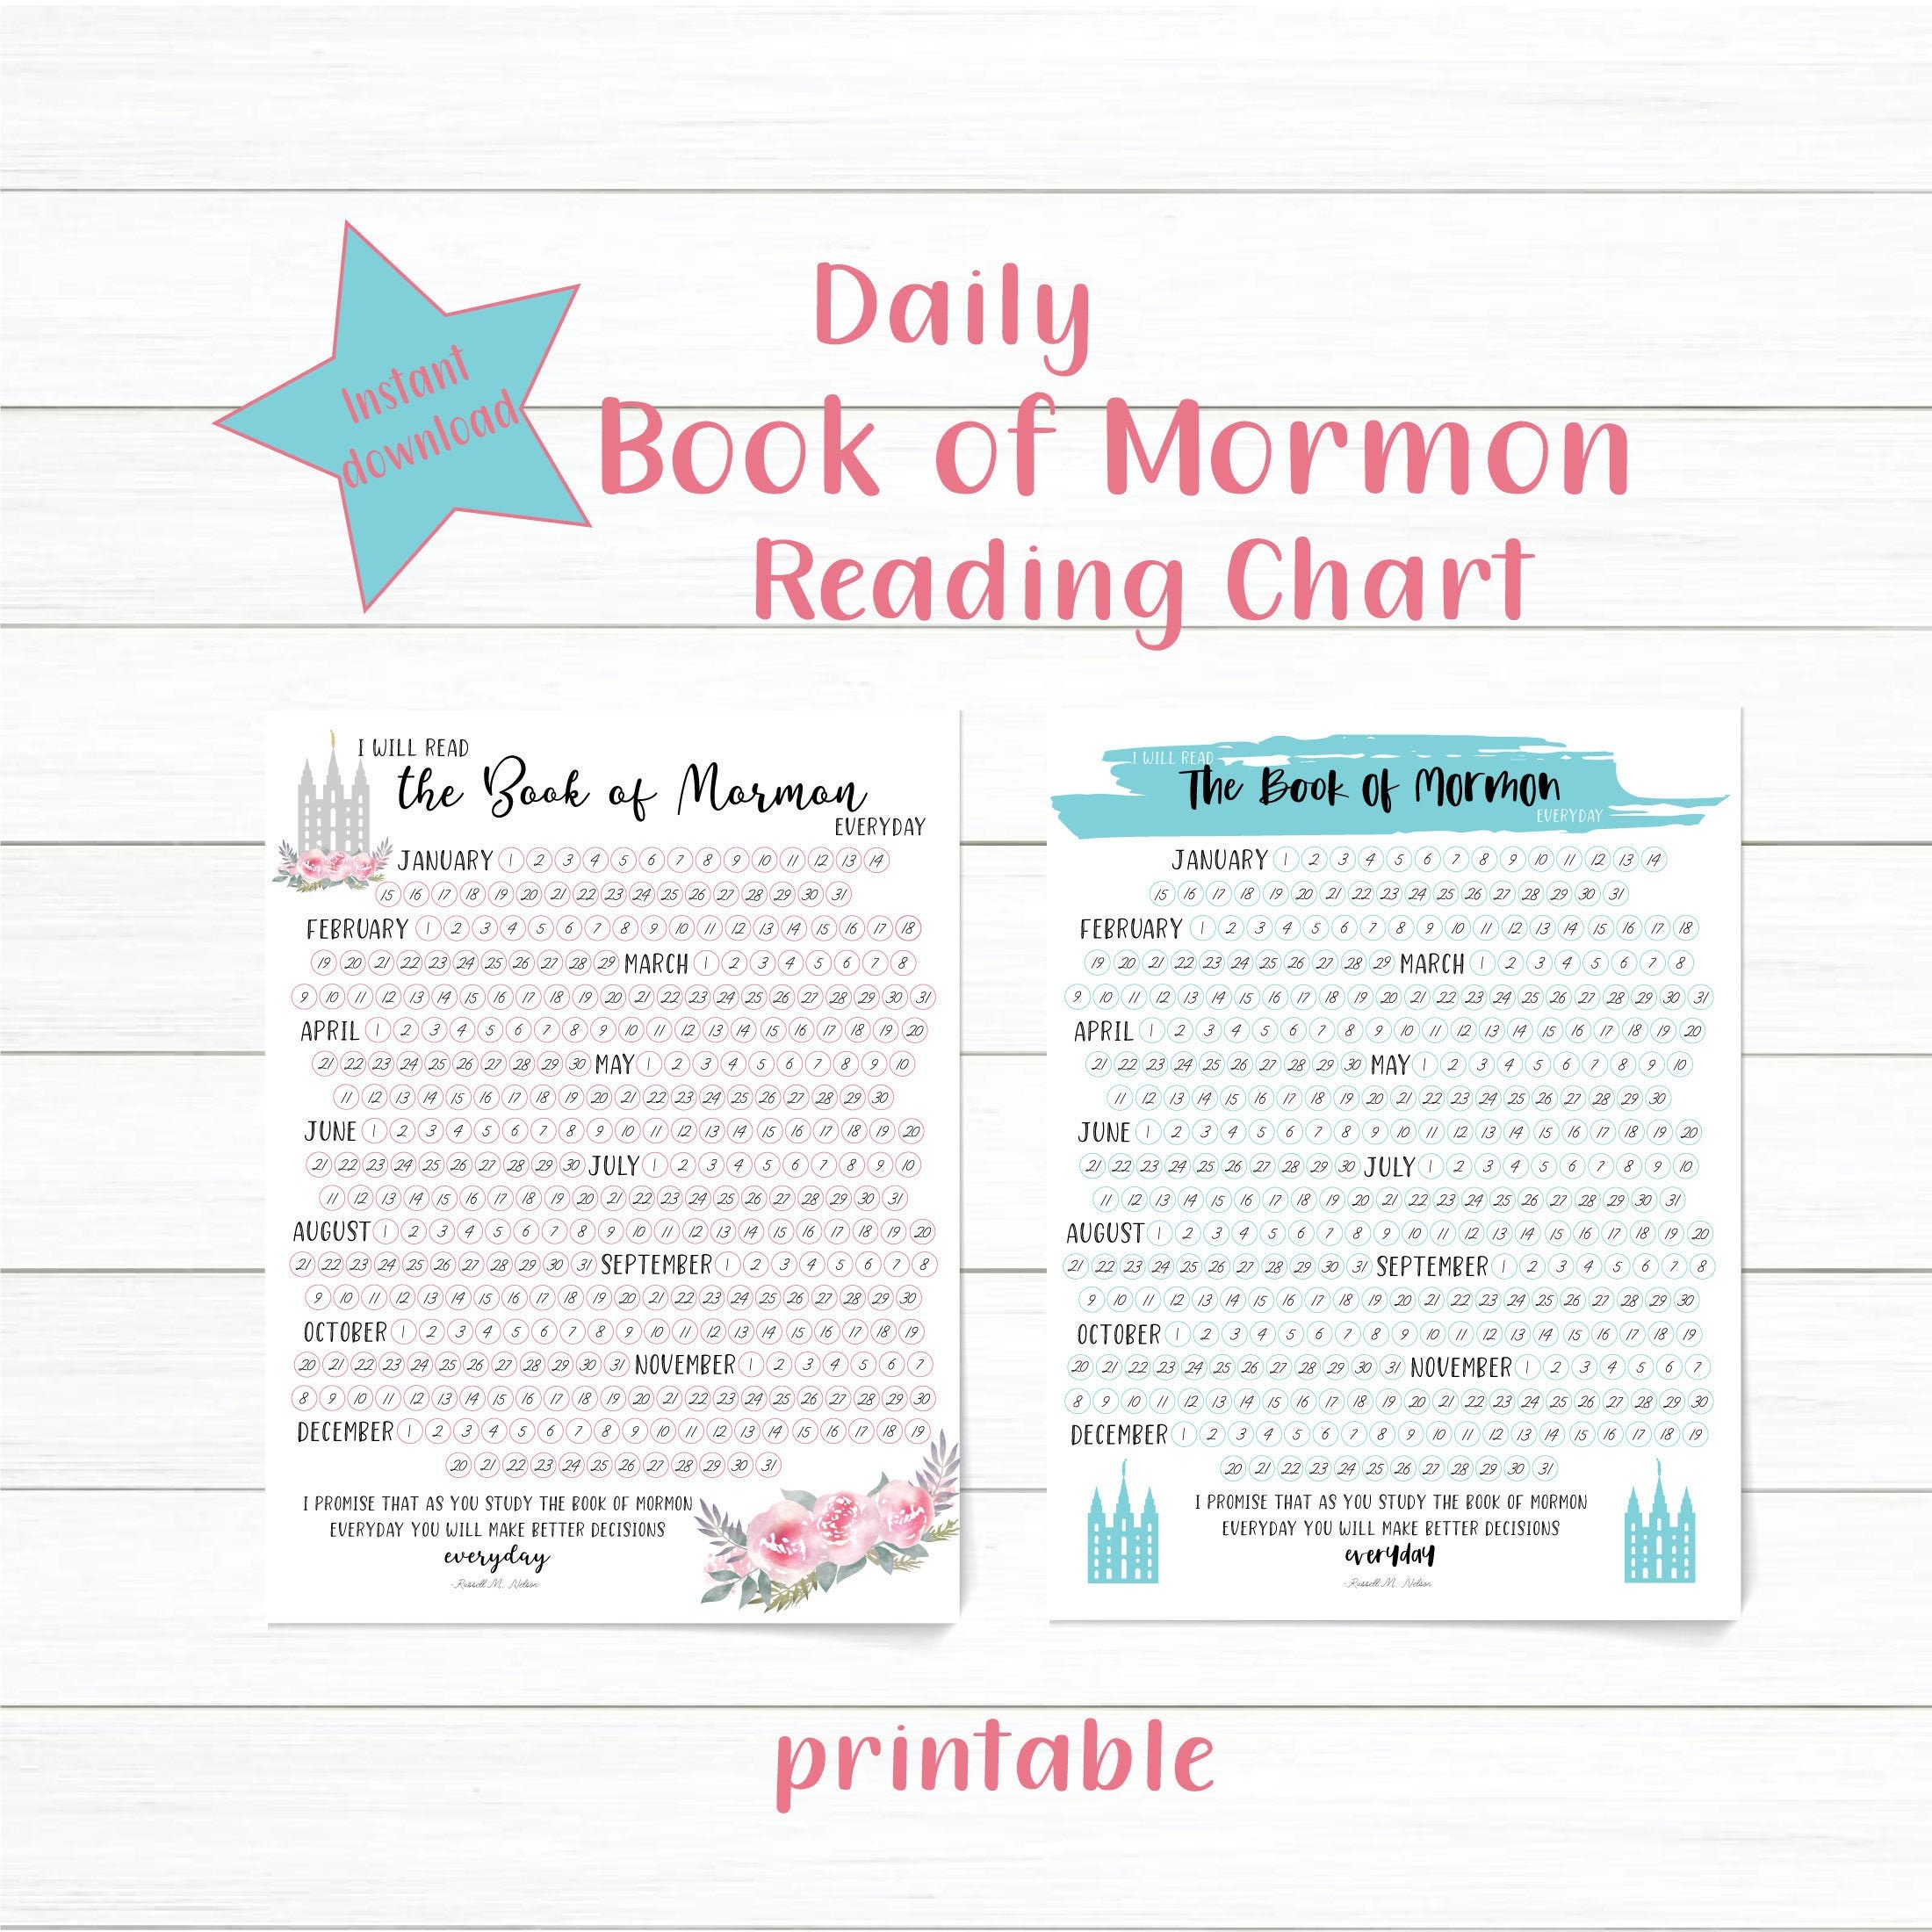 daily-book-of-mormon-reading-chart-instant-download-etsy